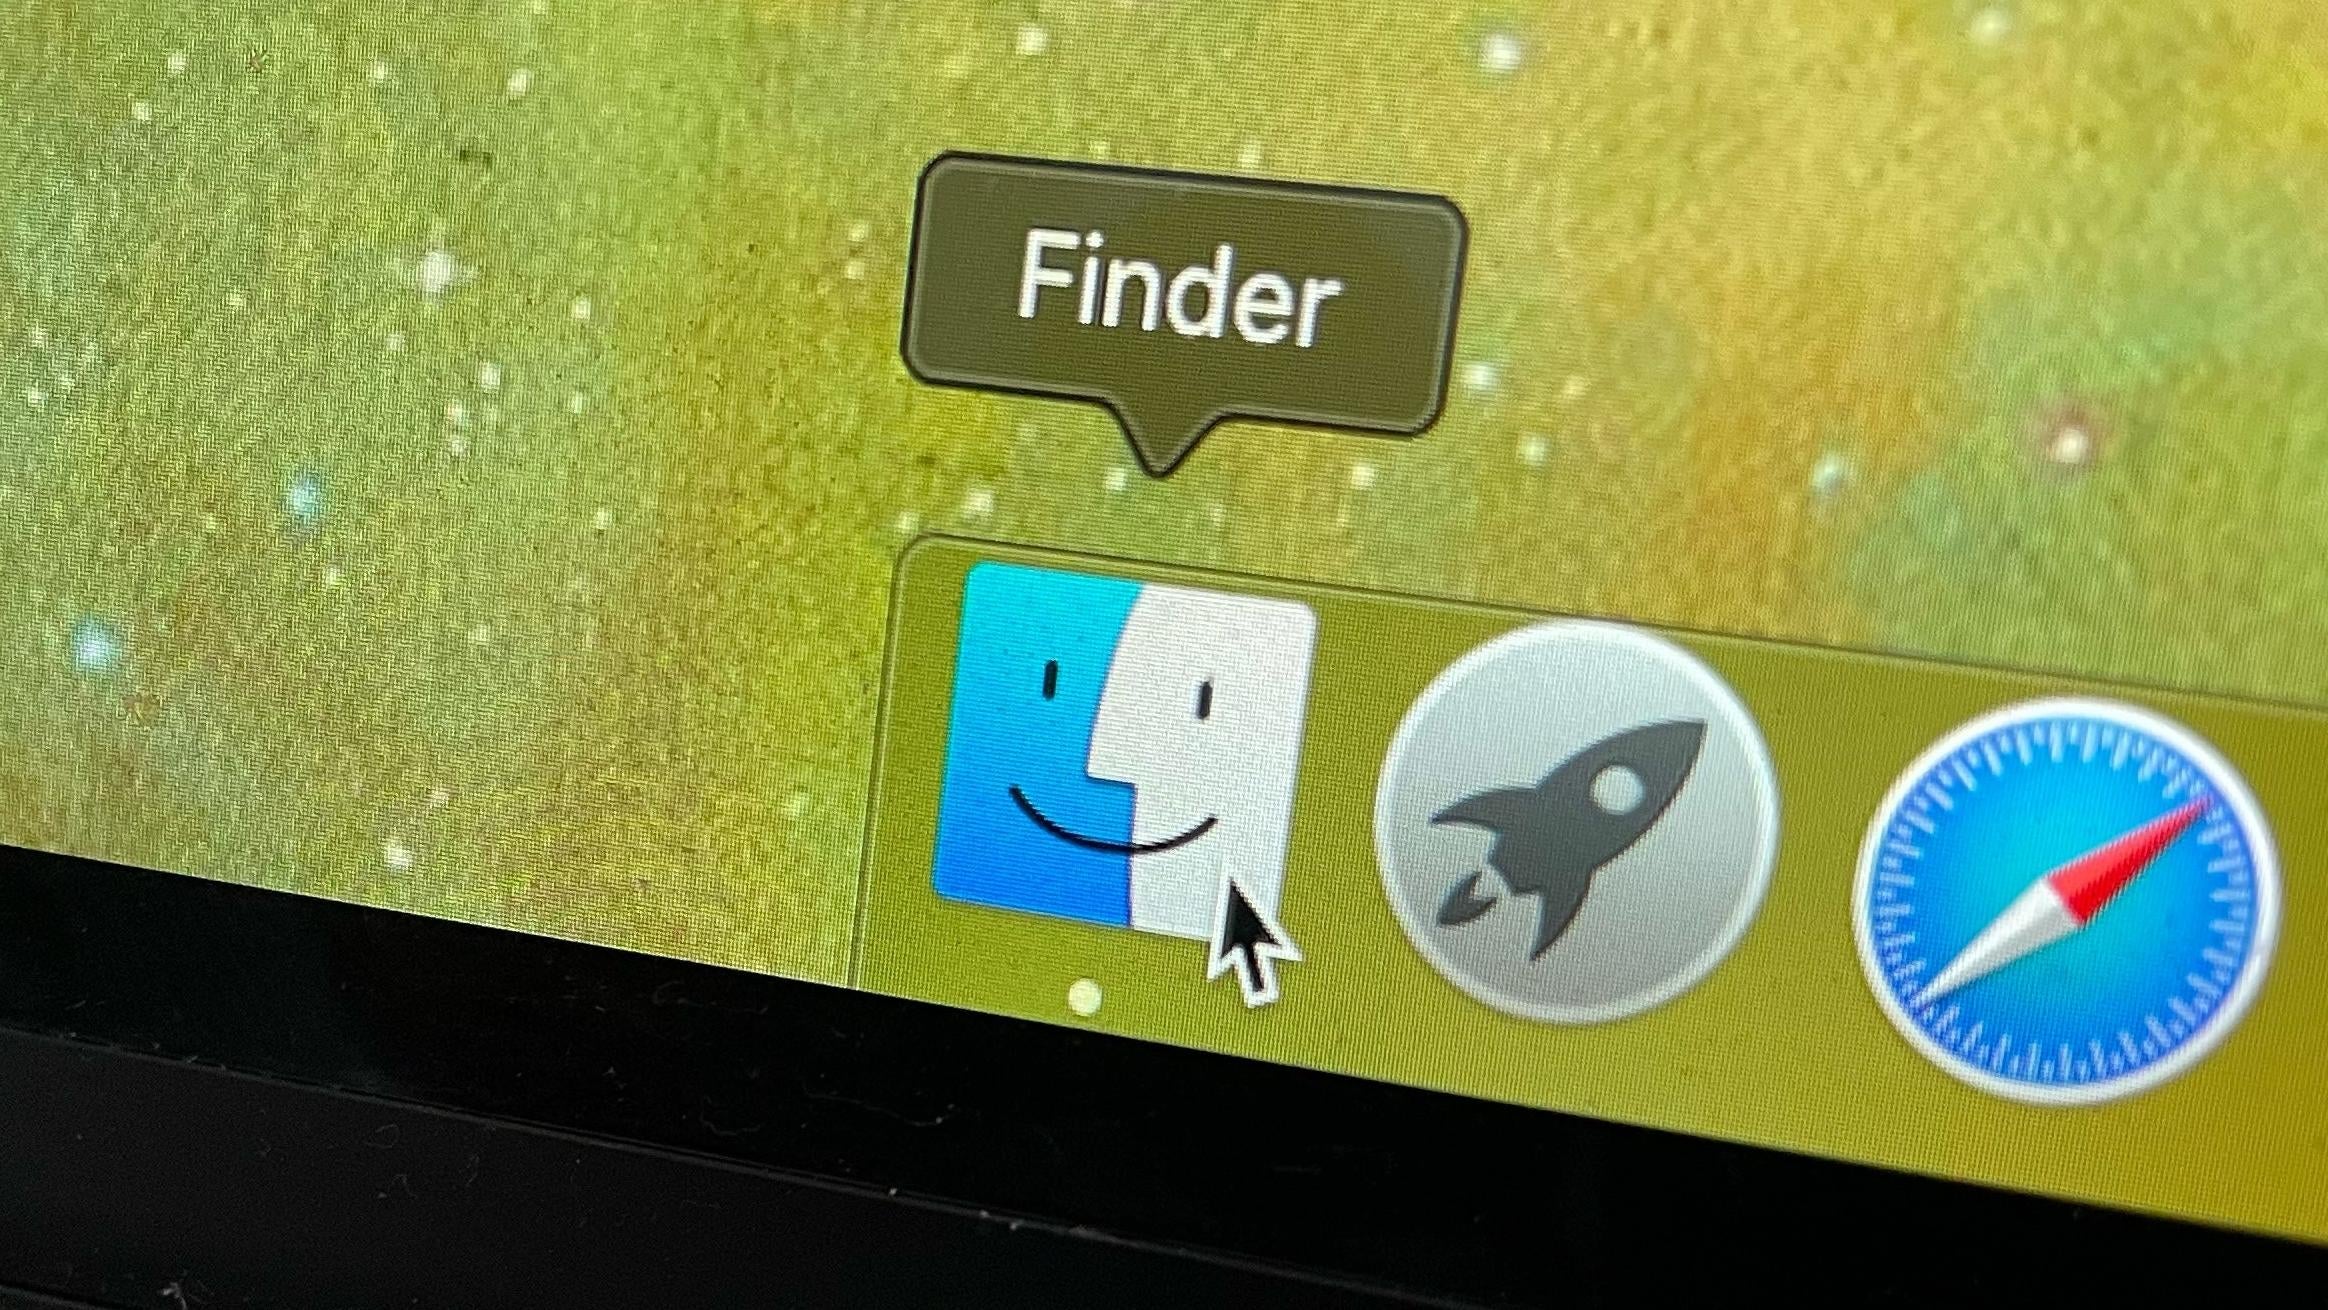 Customise Your Mac’s ‘Finder’ so It Shows You the Things You Actually Need